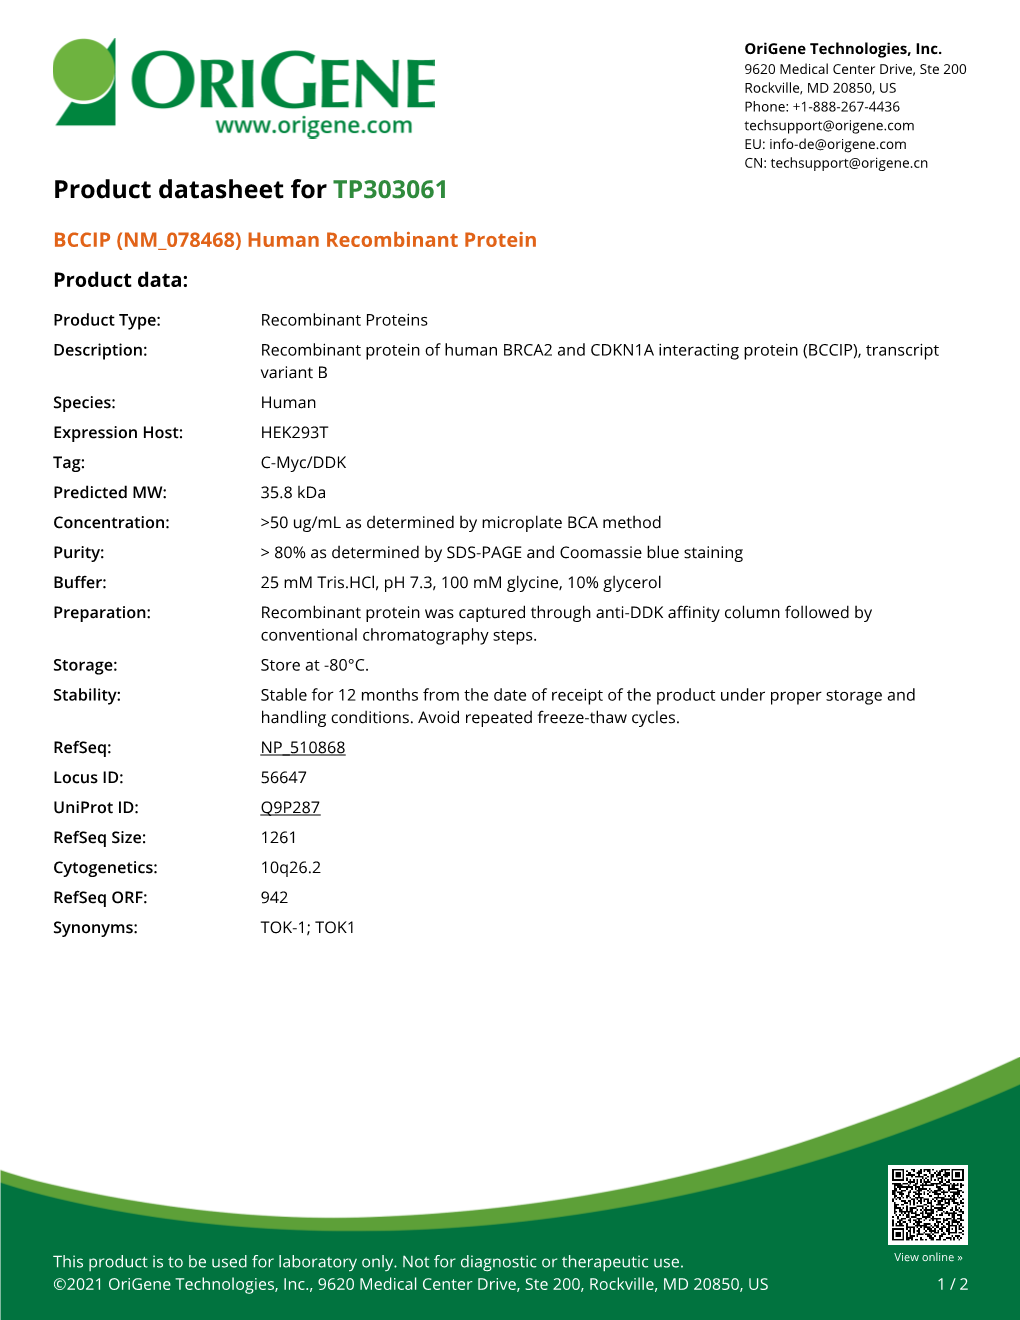 BCCIP (NM 078468) Human Recombinant Protein Product Data